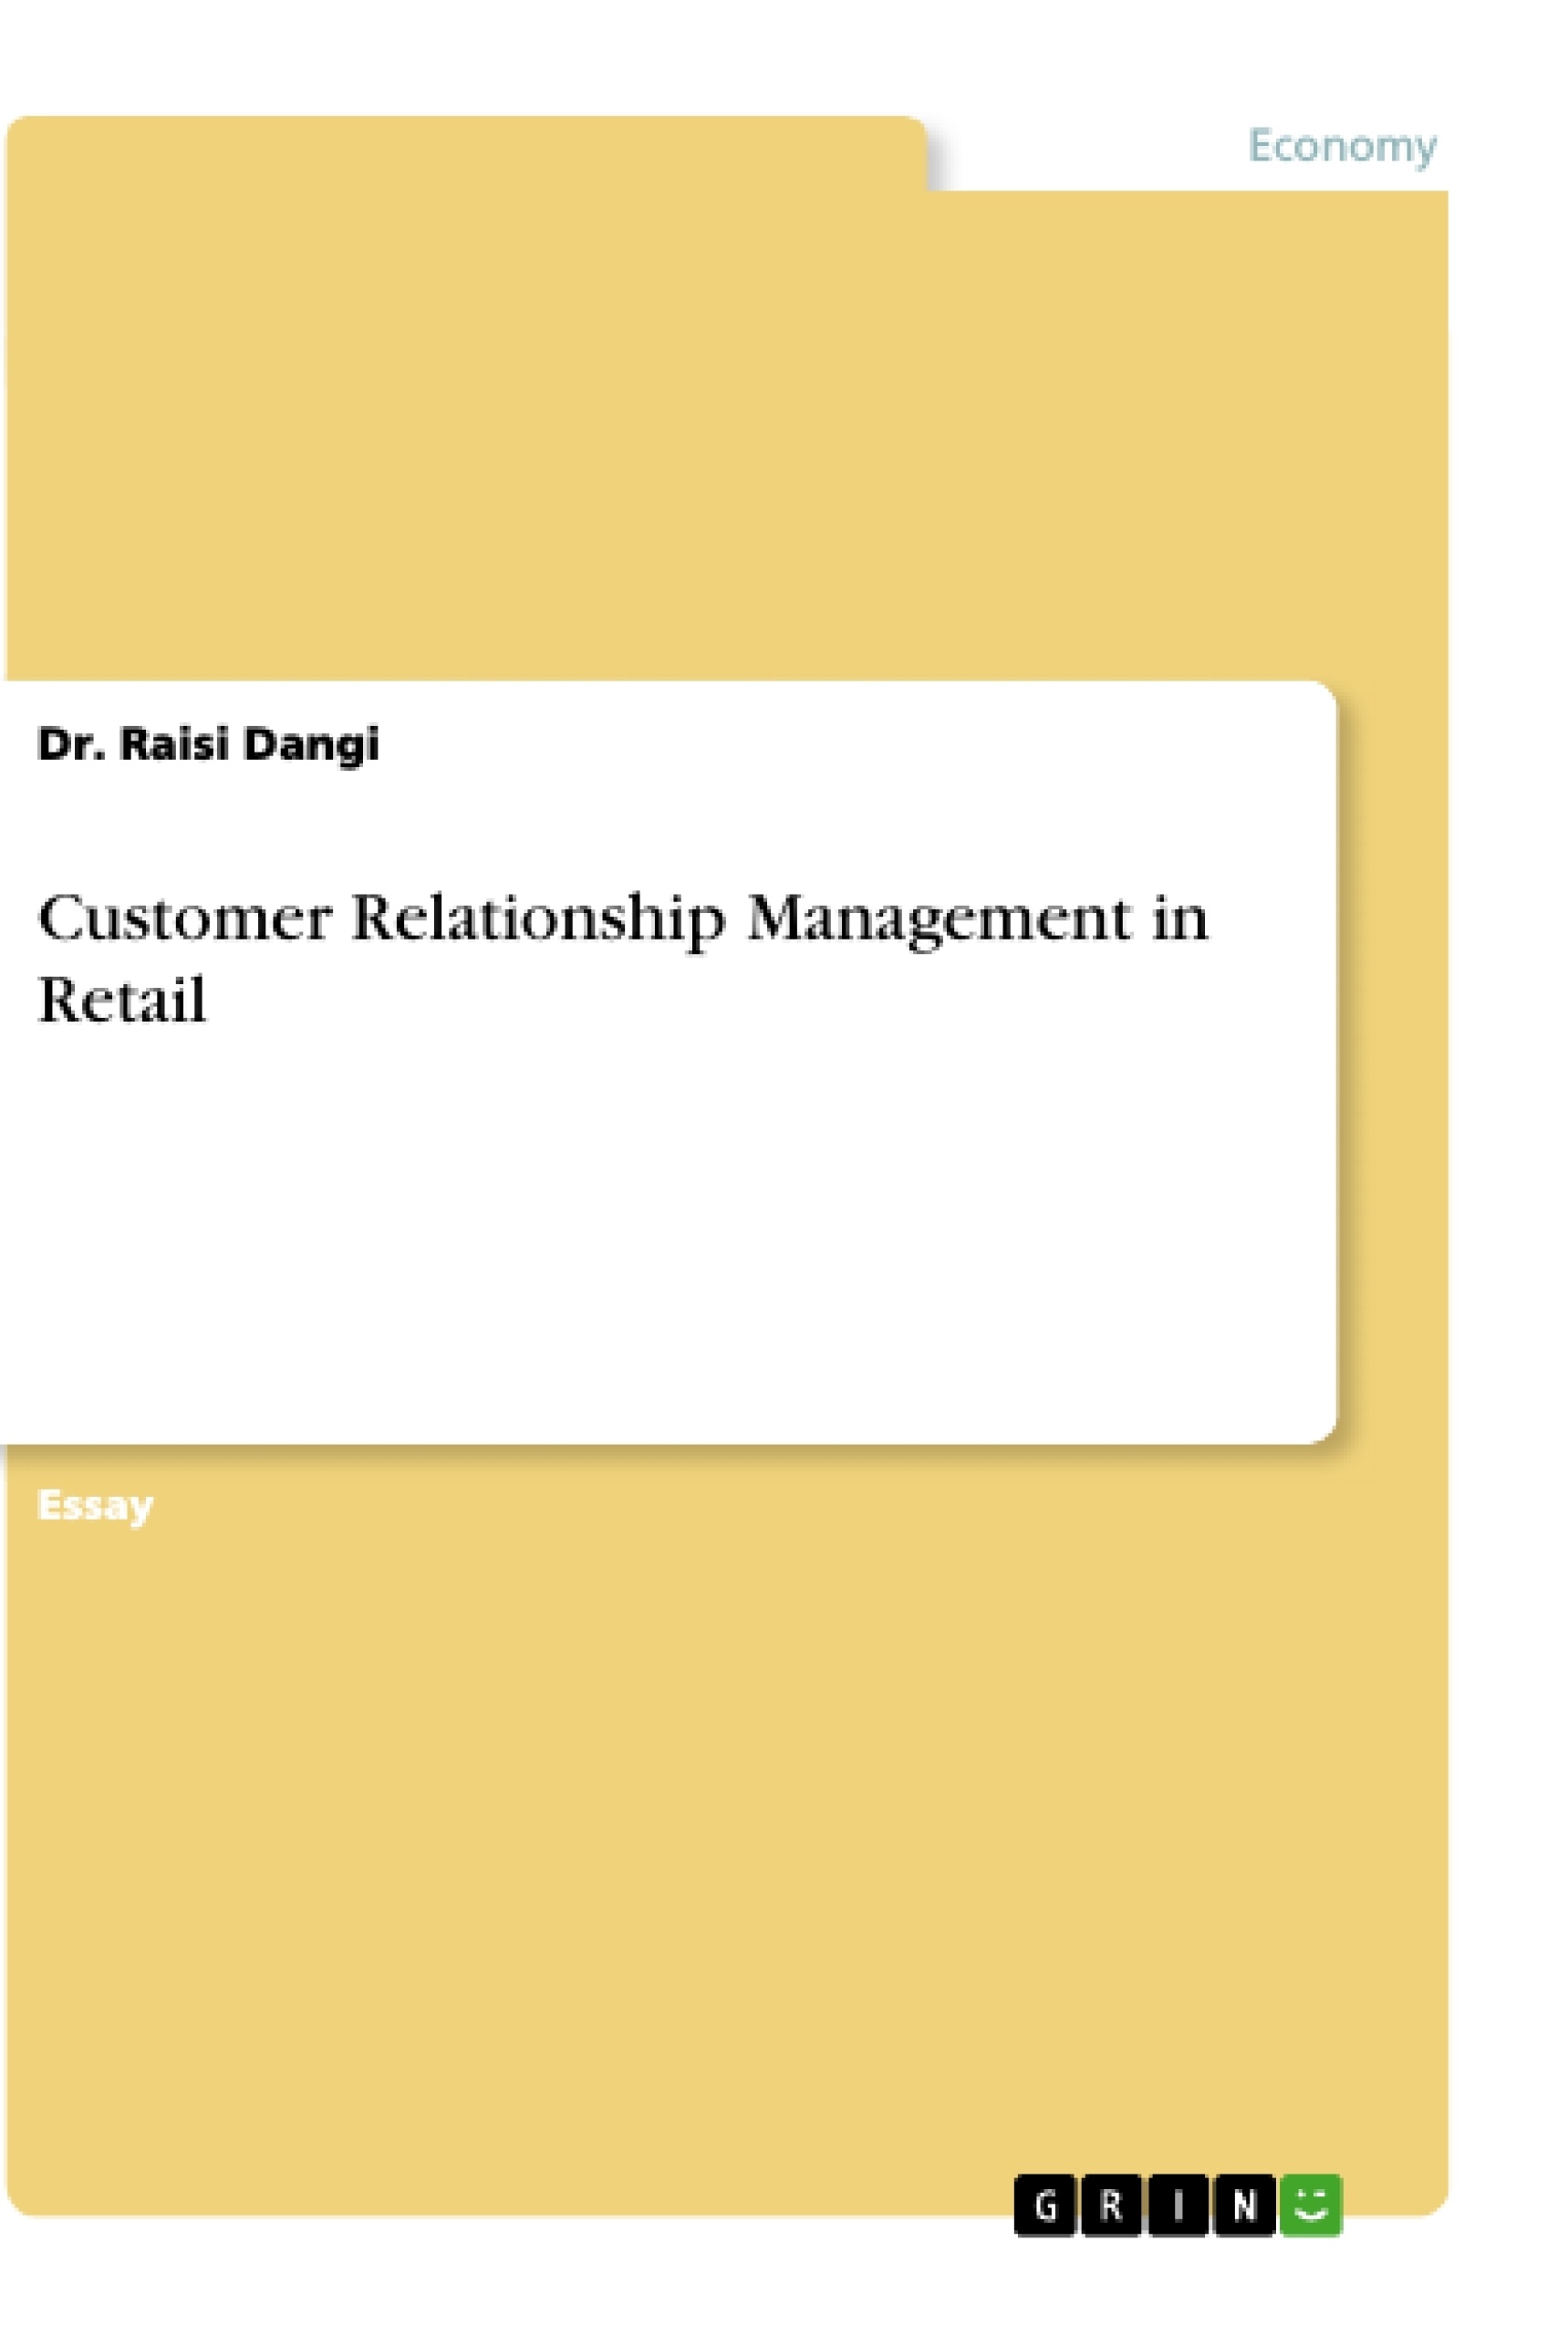 Title: Customer Relationship Management in Retail